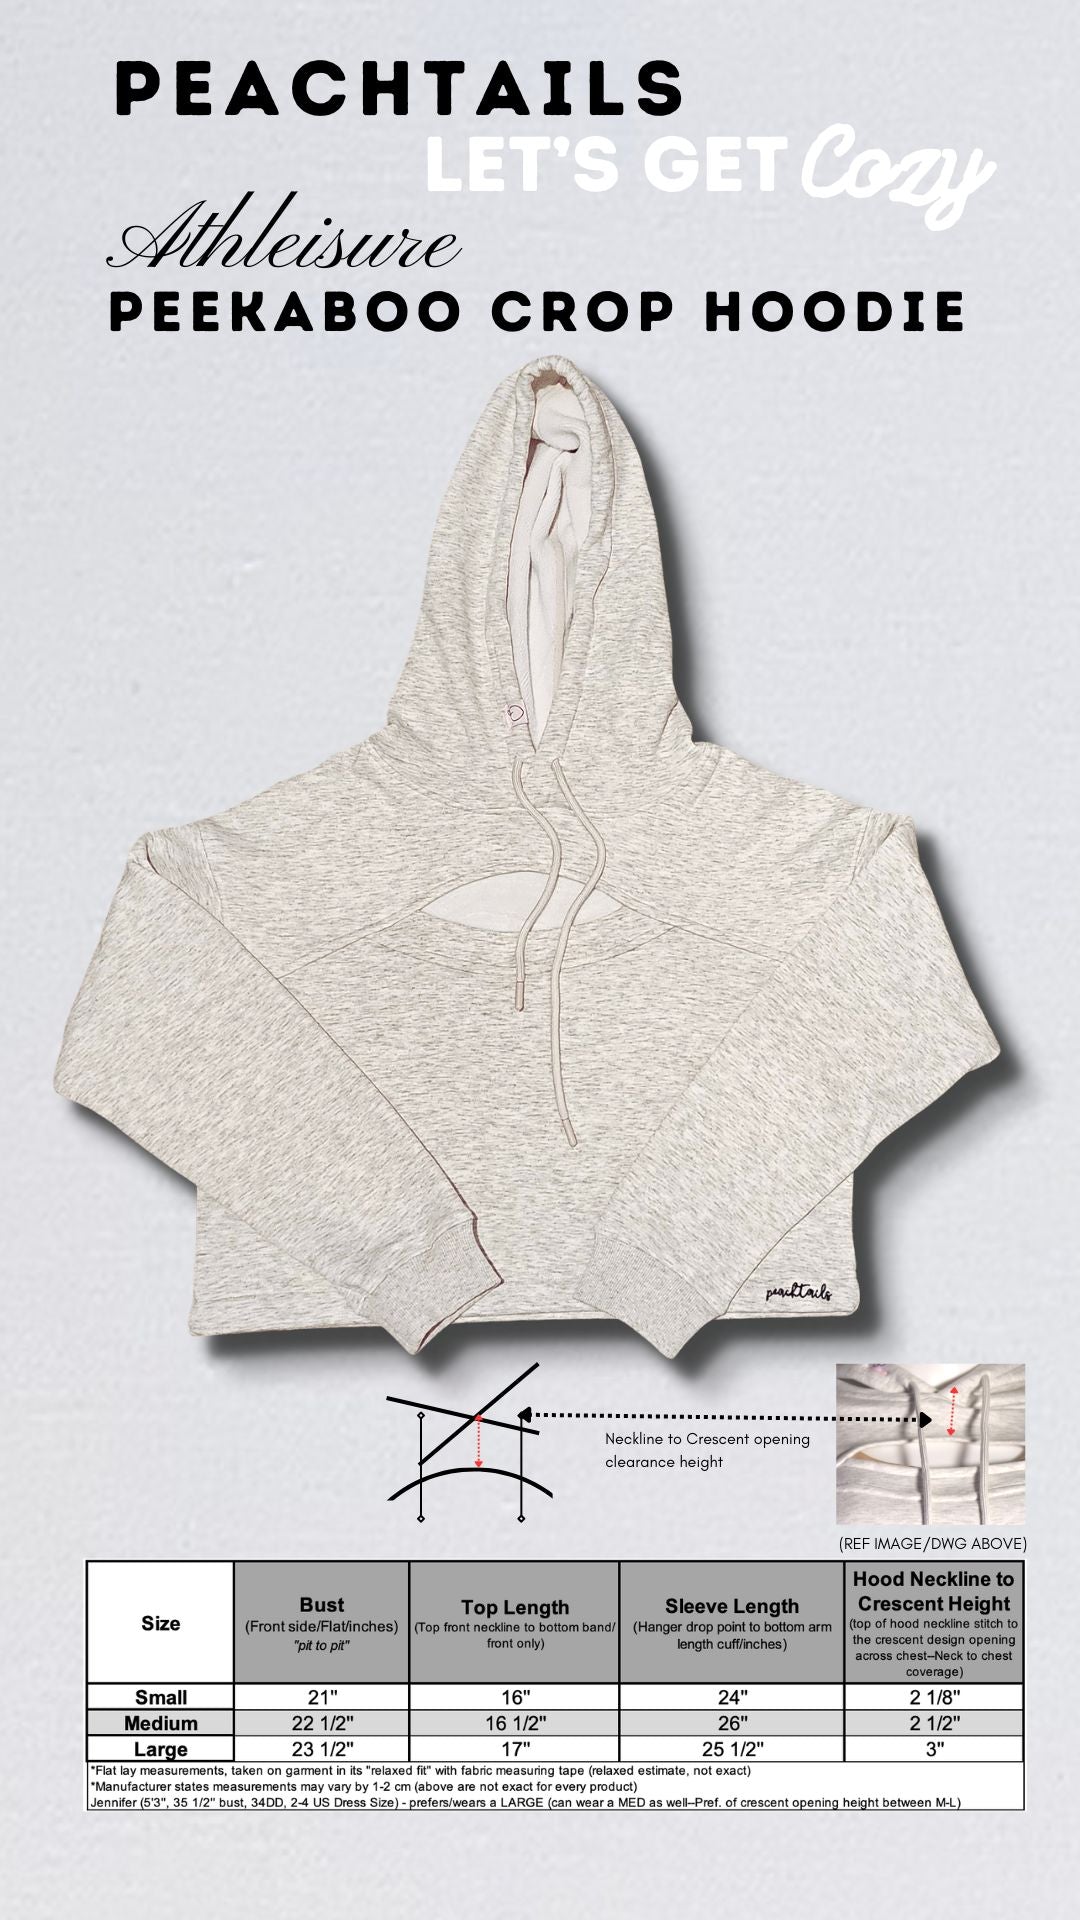 The image features an ad for Peachtails Athleisure Peekaboo Crop Hoodie with the slogan "Let's Get Cozy." Displayed is a light heather grey crop hoodie with a deep cut neckline and hood. A size chart is included with measurements for bust, top length, sleeve length, and hood neckline to crescent height for small, medium, and large sizes.